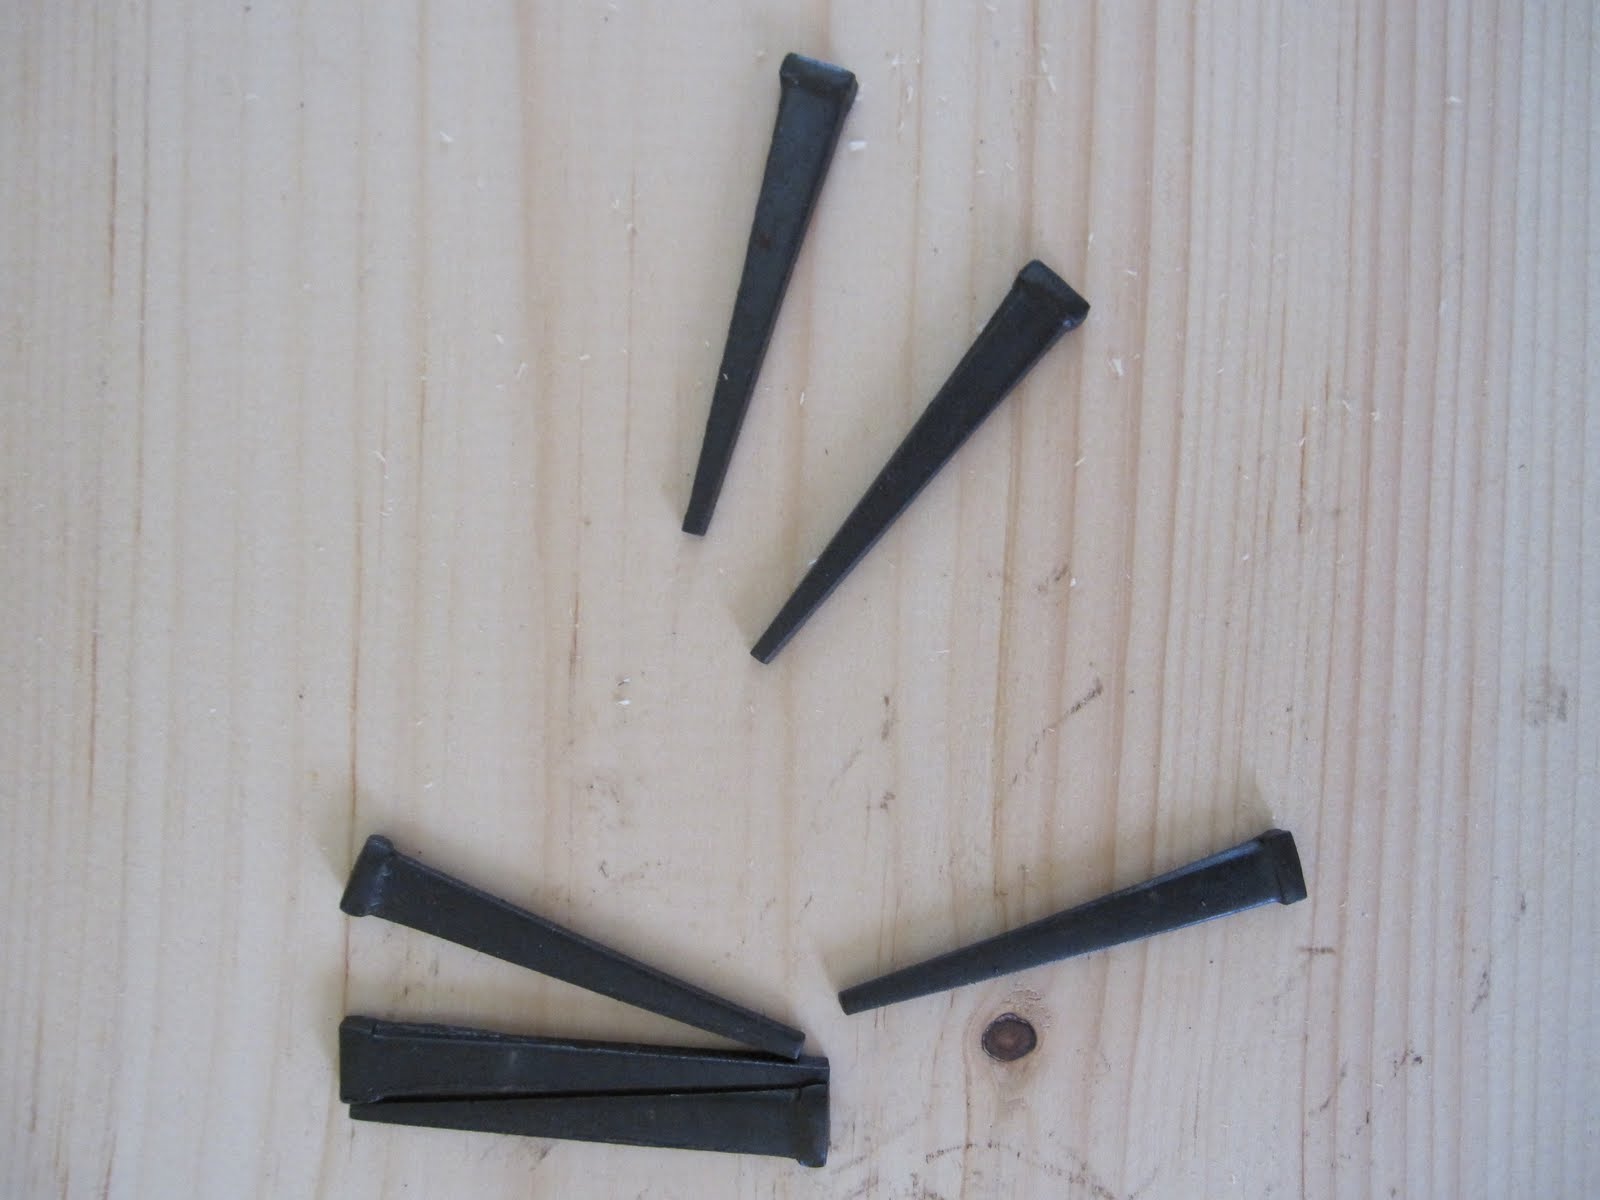 House Square Cut Nails and Old Fashioned Cut Nails